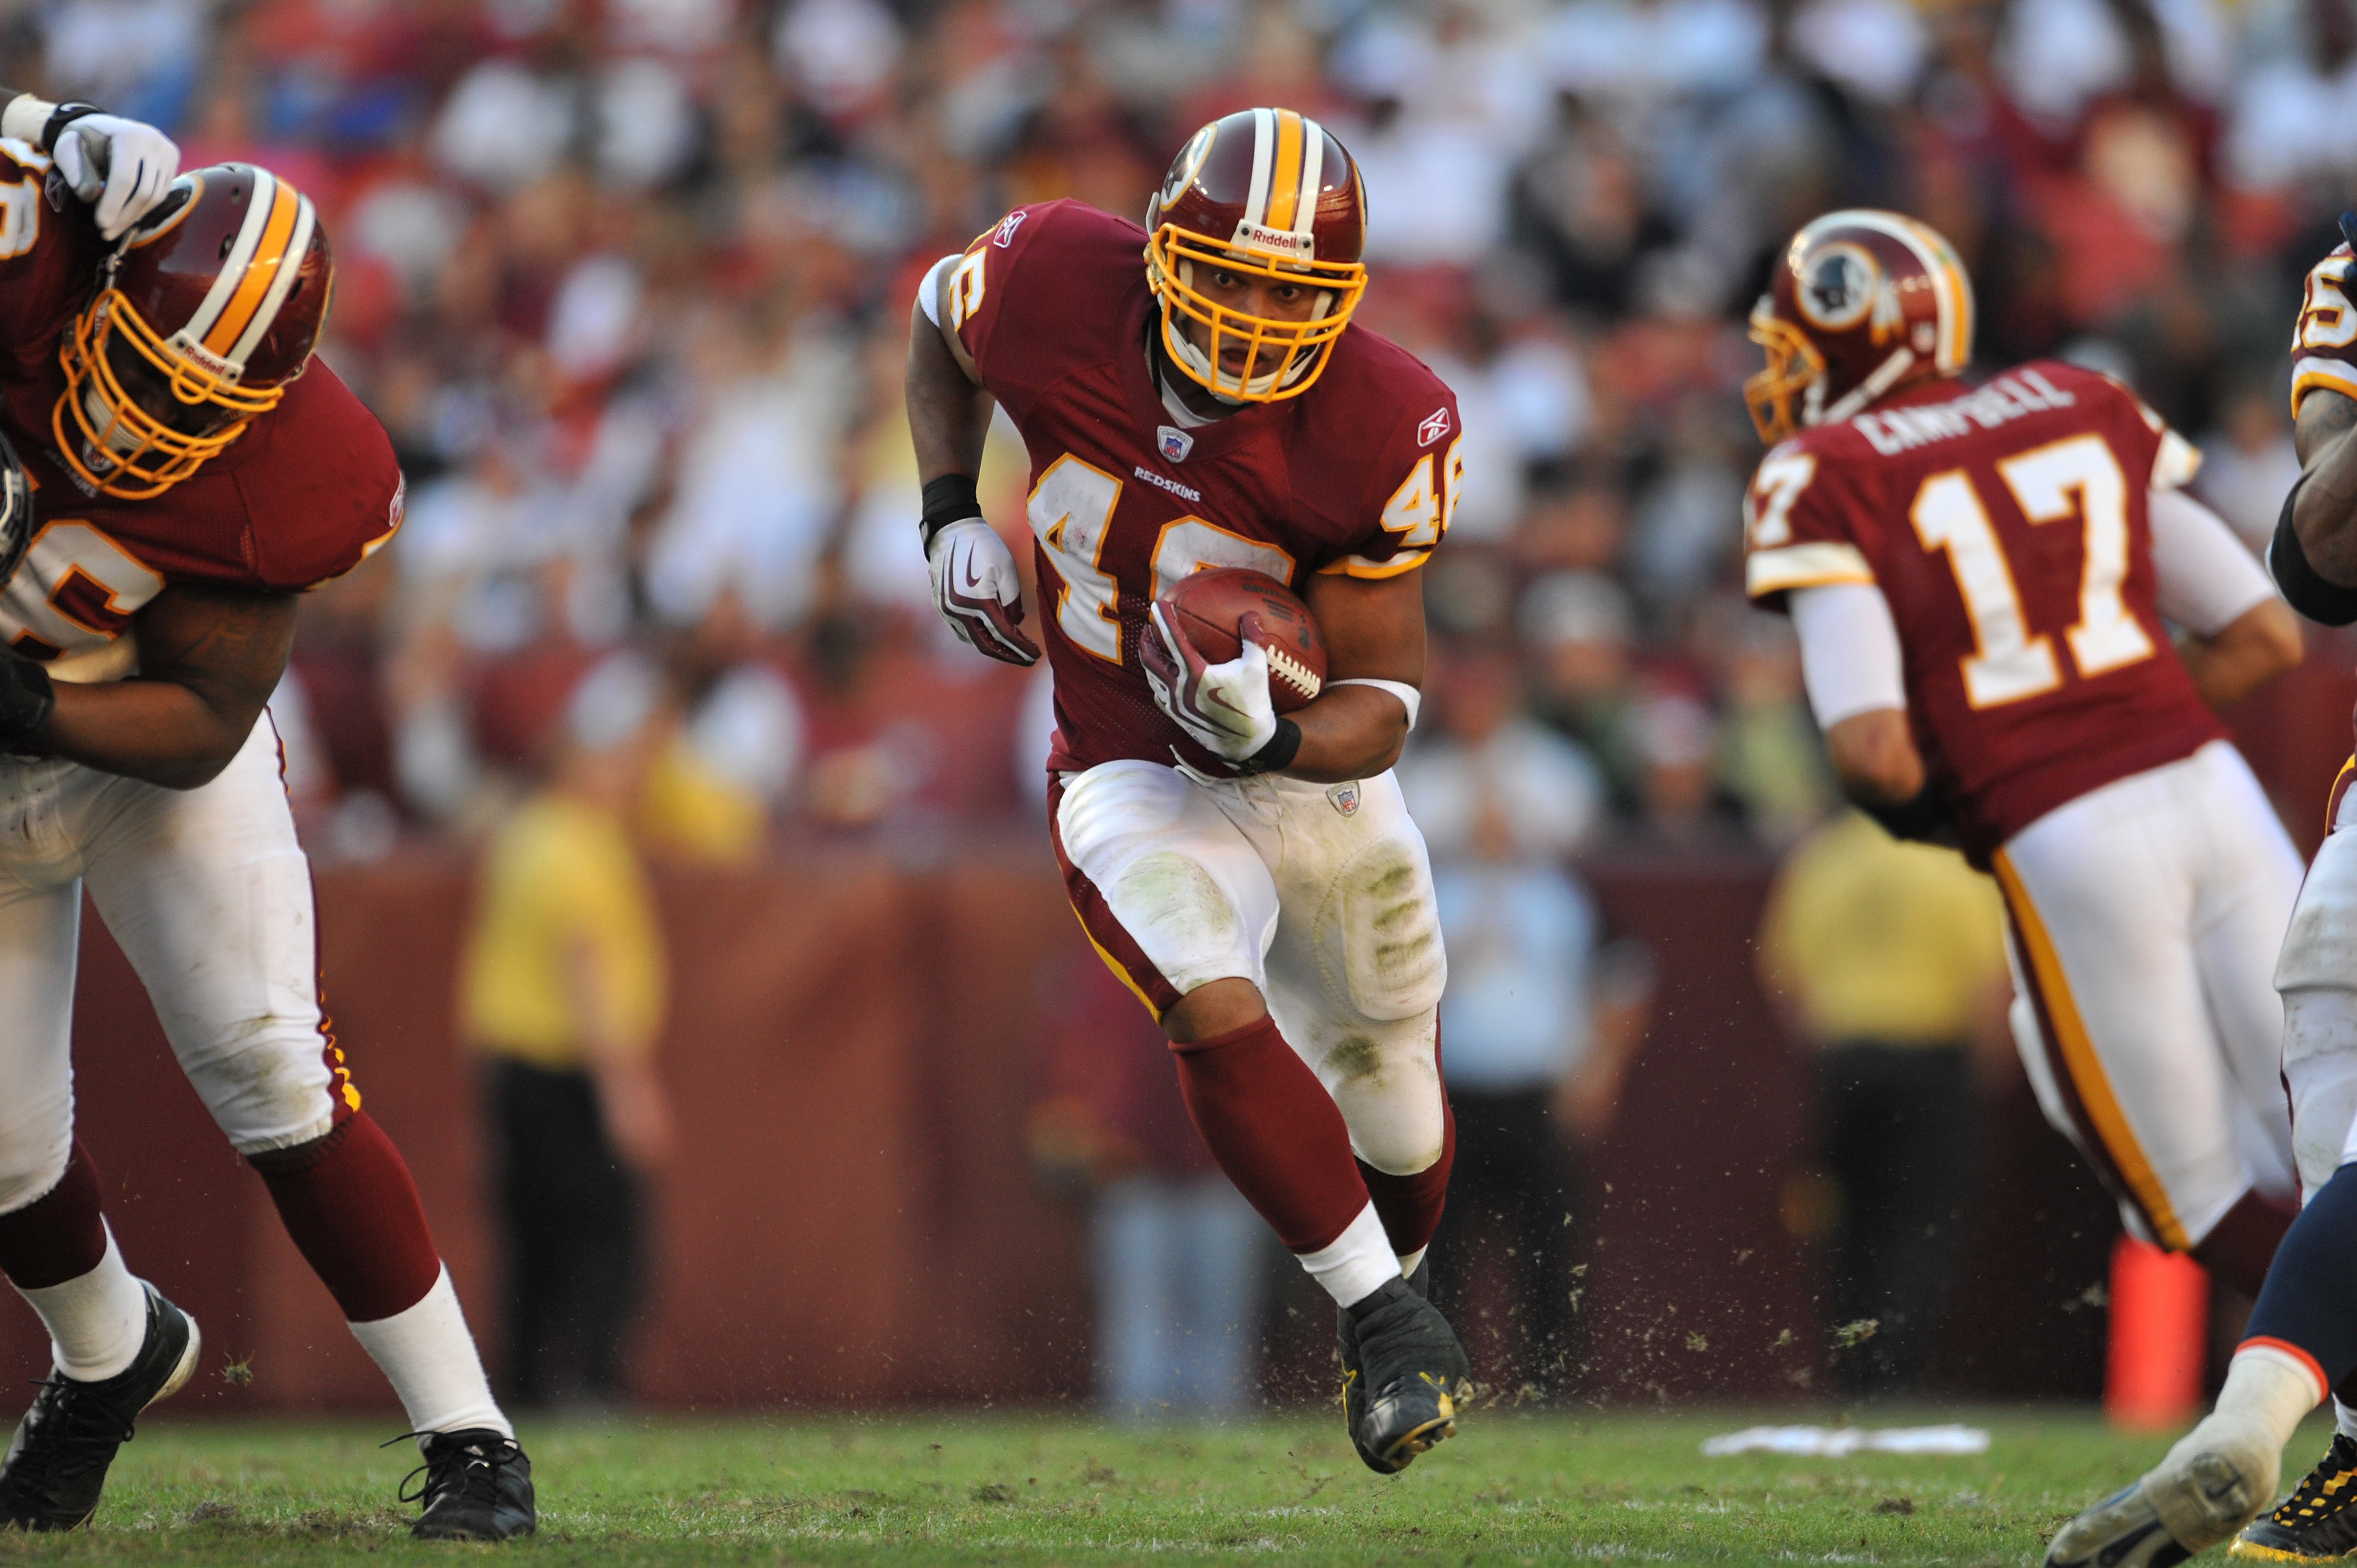 LANDOVER, MD - NOVEMBER 15:  Ladell Betts #46 of the Washington Redskins runs the ball against the Denver Broncos at FedExField on November 15, 2009 in Landover, Maryland. The Redskins won 27-17. (Photo by Larry French/Getty Images)